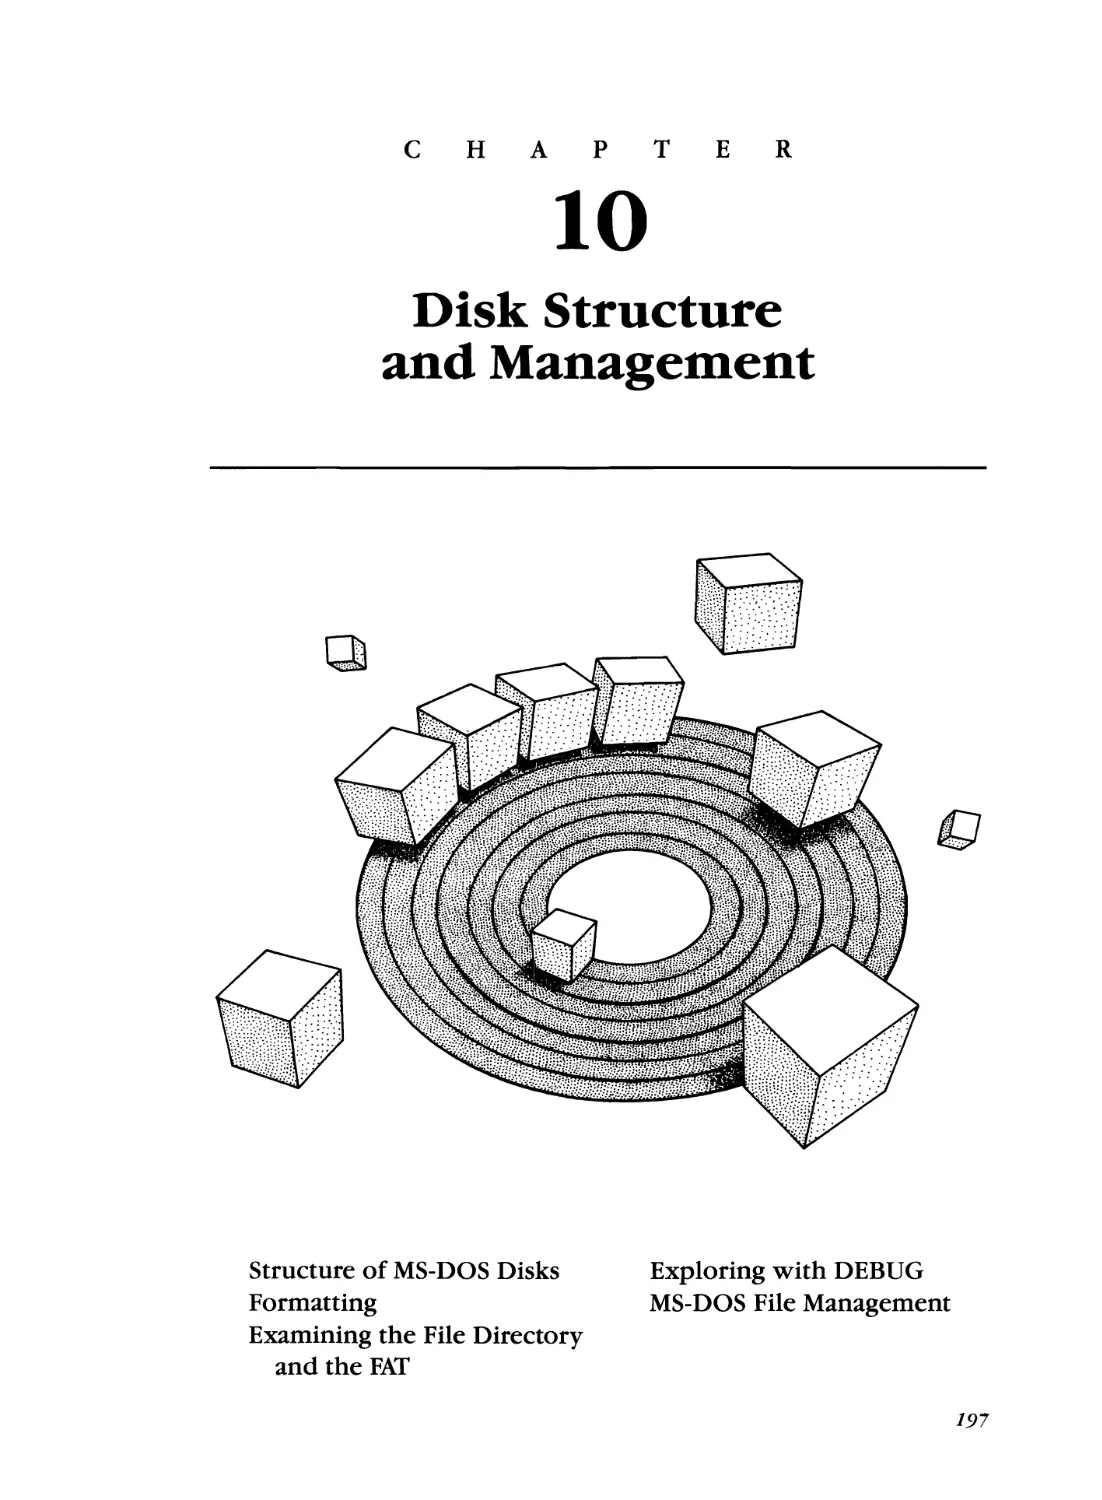 Chapter 10 - Disk Structure and Management